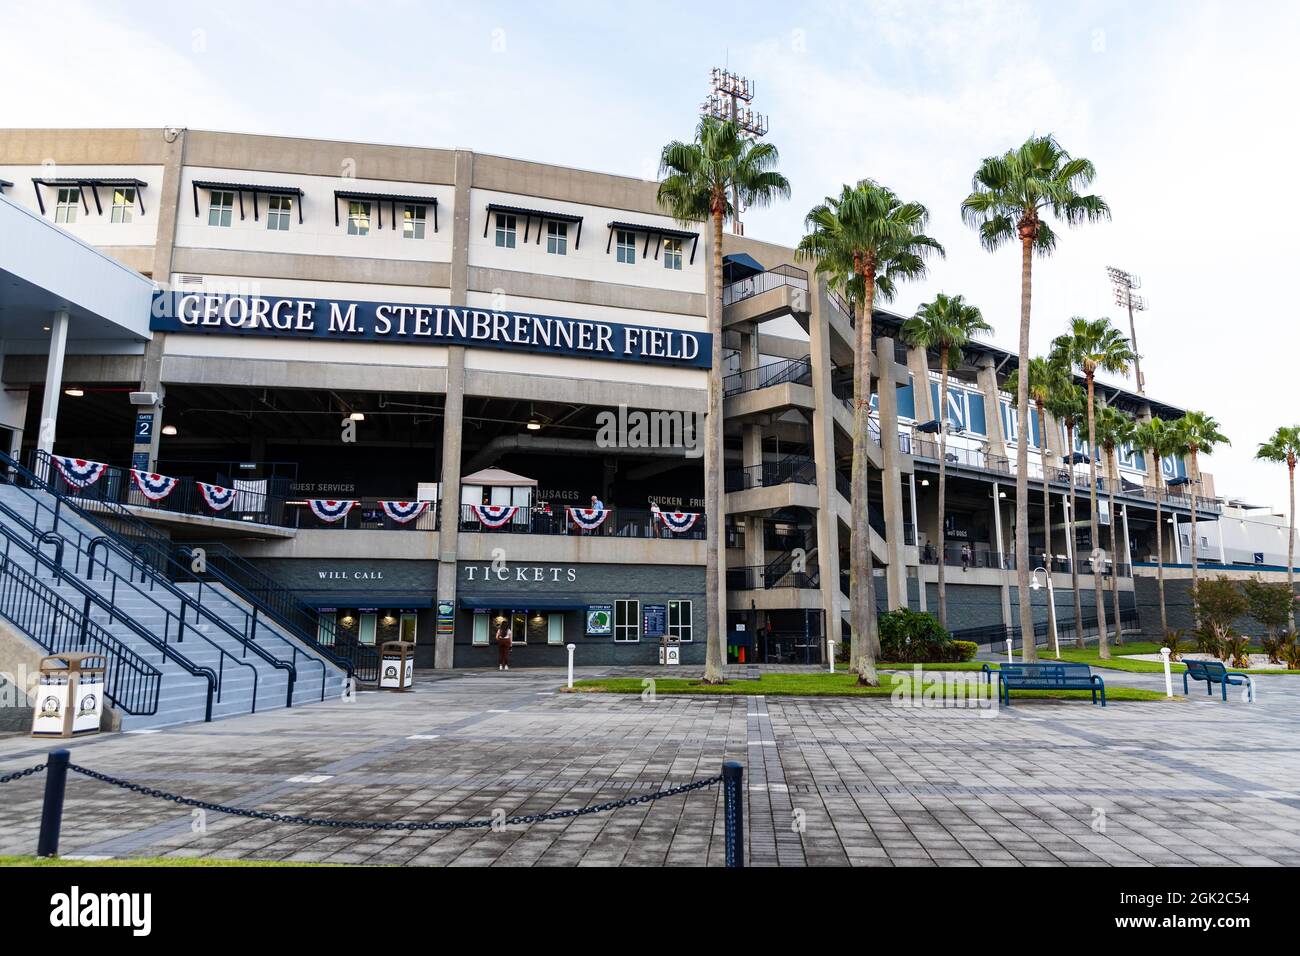 Tampa, FL - September 10, 2021: George M. Steinbrenner Field in Tampa, Florida Stock Photo